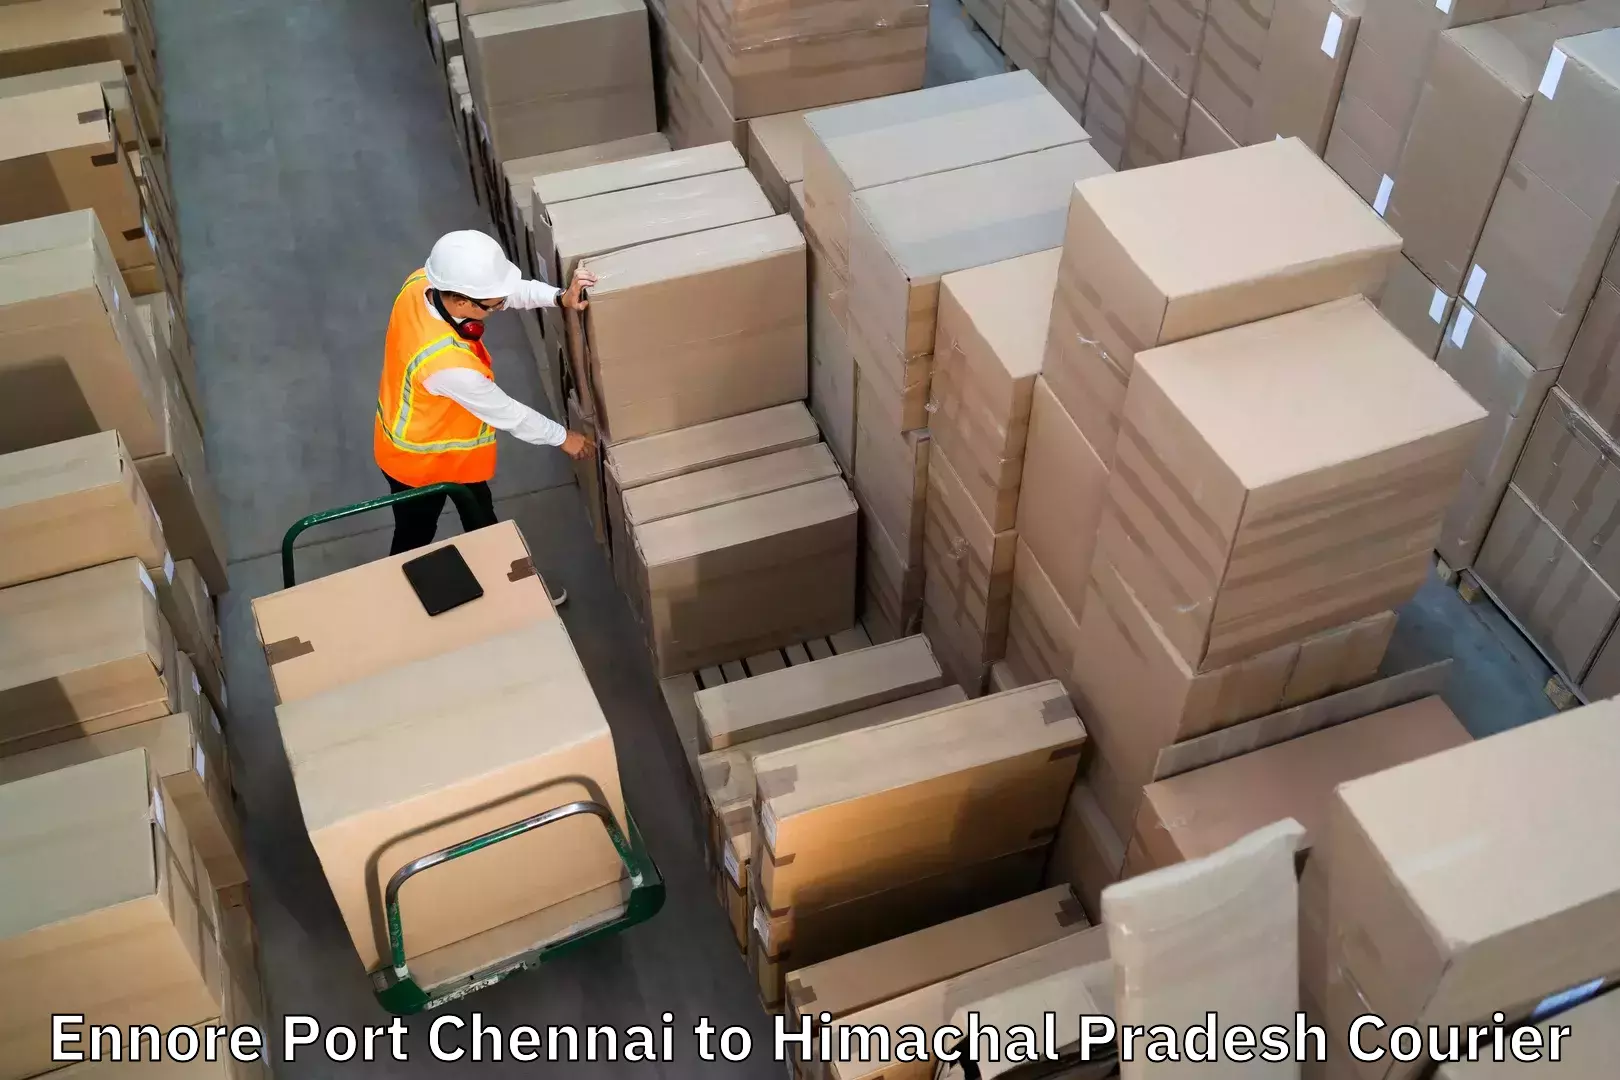 Instant baggage transport quote Ennore Port Chennai to Rehan